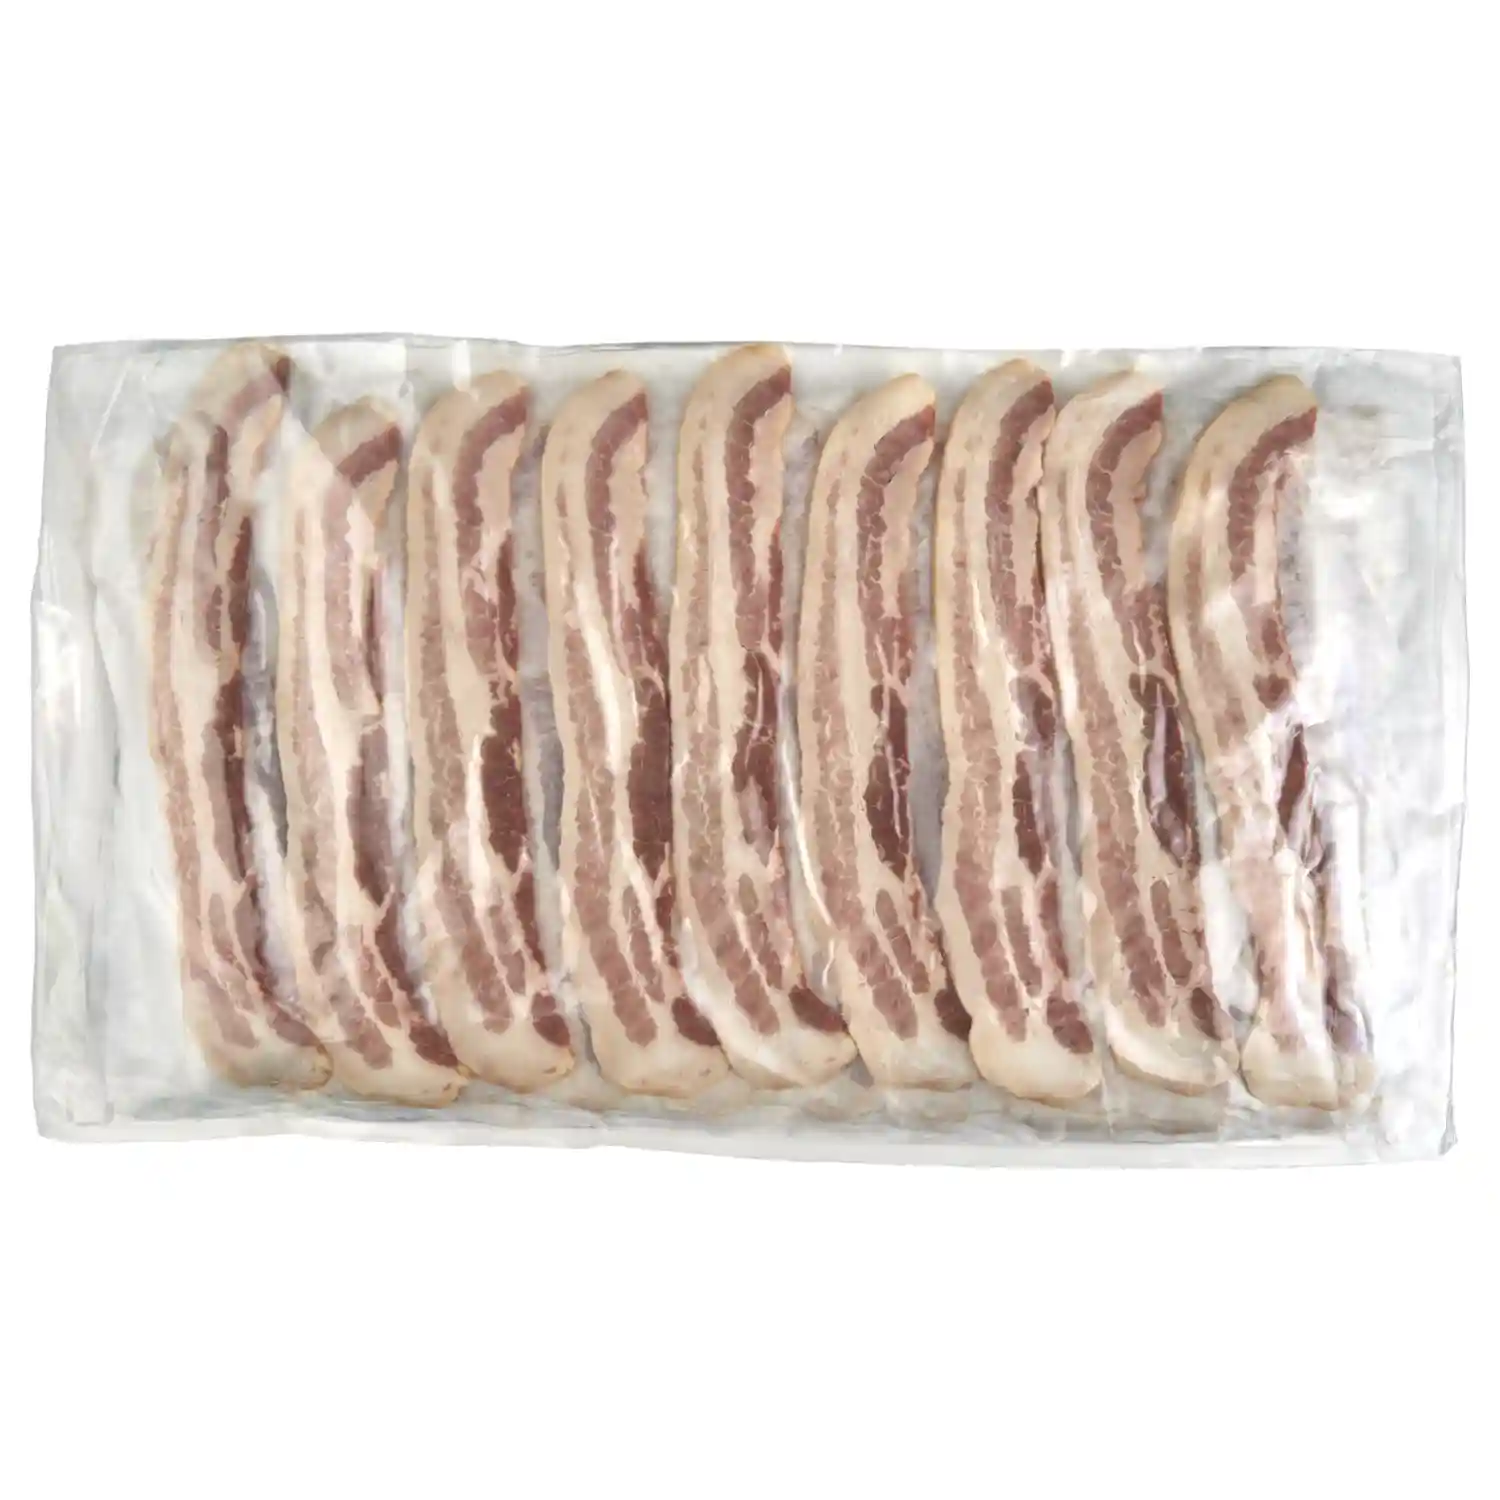 Wright® Brand Naturally Applewood Smoked Thin Sliced Bacon, Flat-Pack®, 15 Lbs, 18-22 Slices per Pound, Gas Flushed_image_31